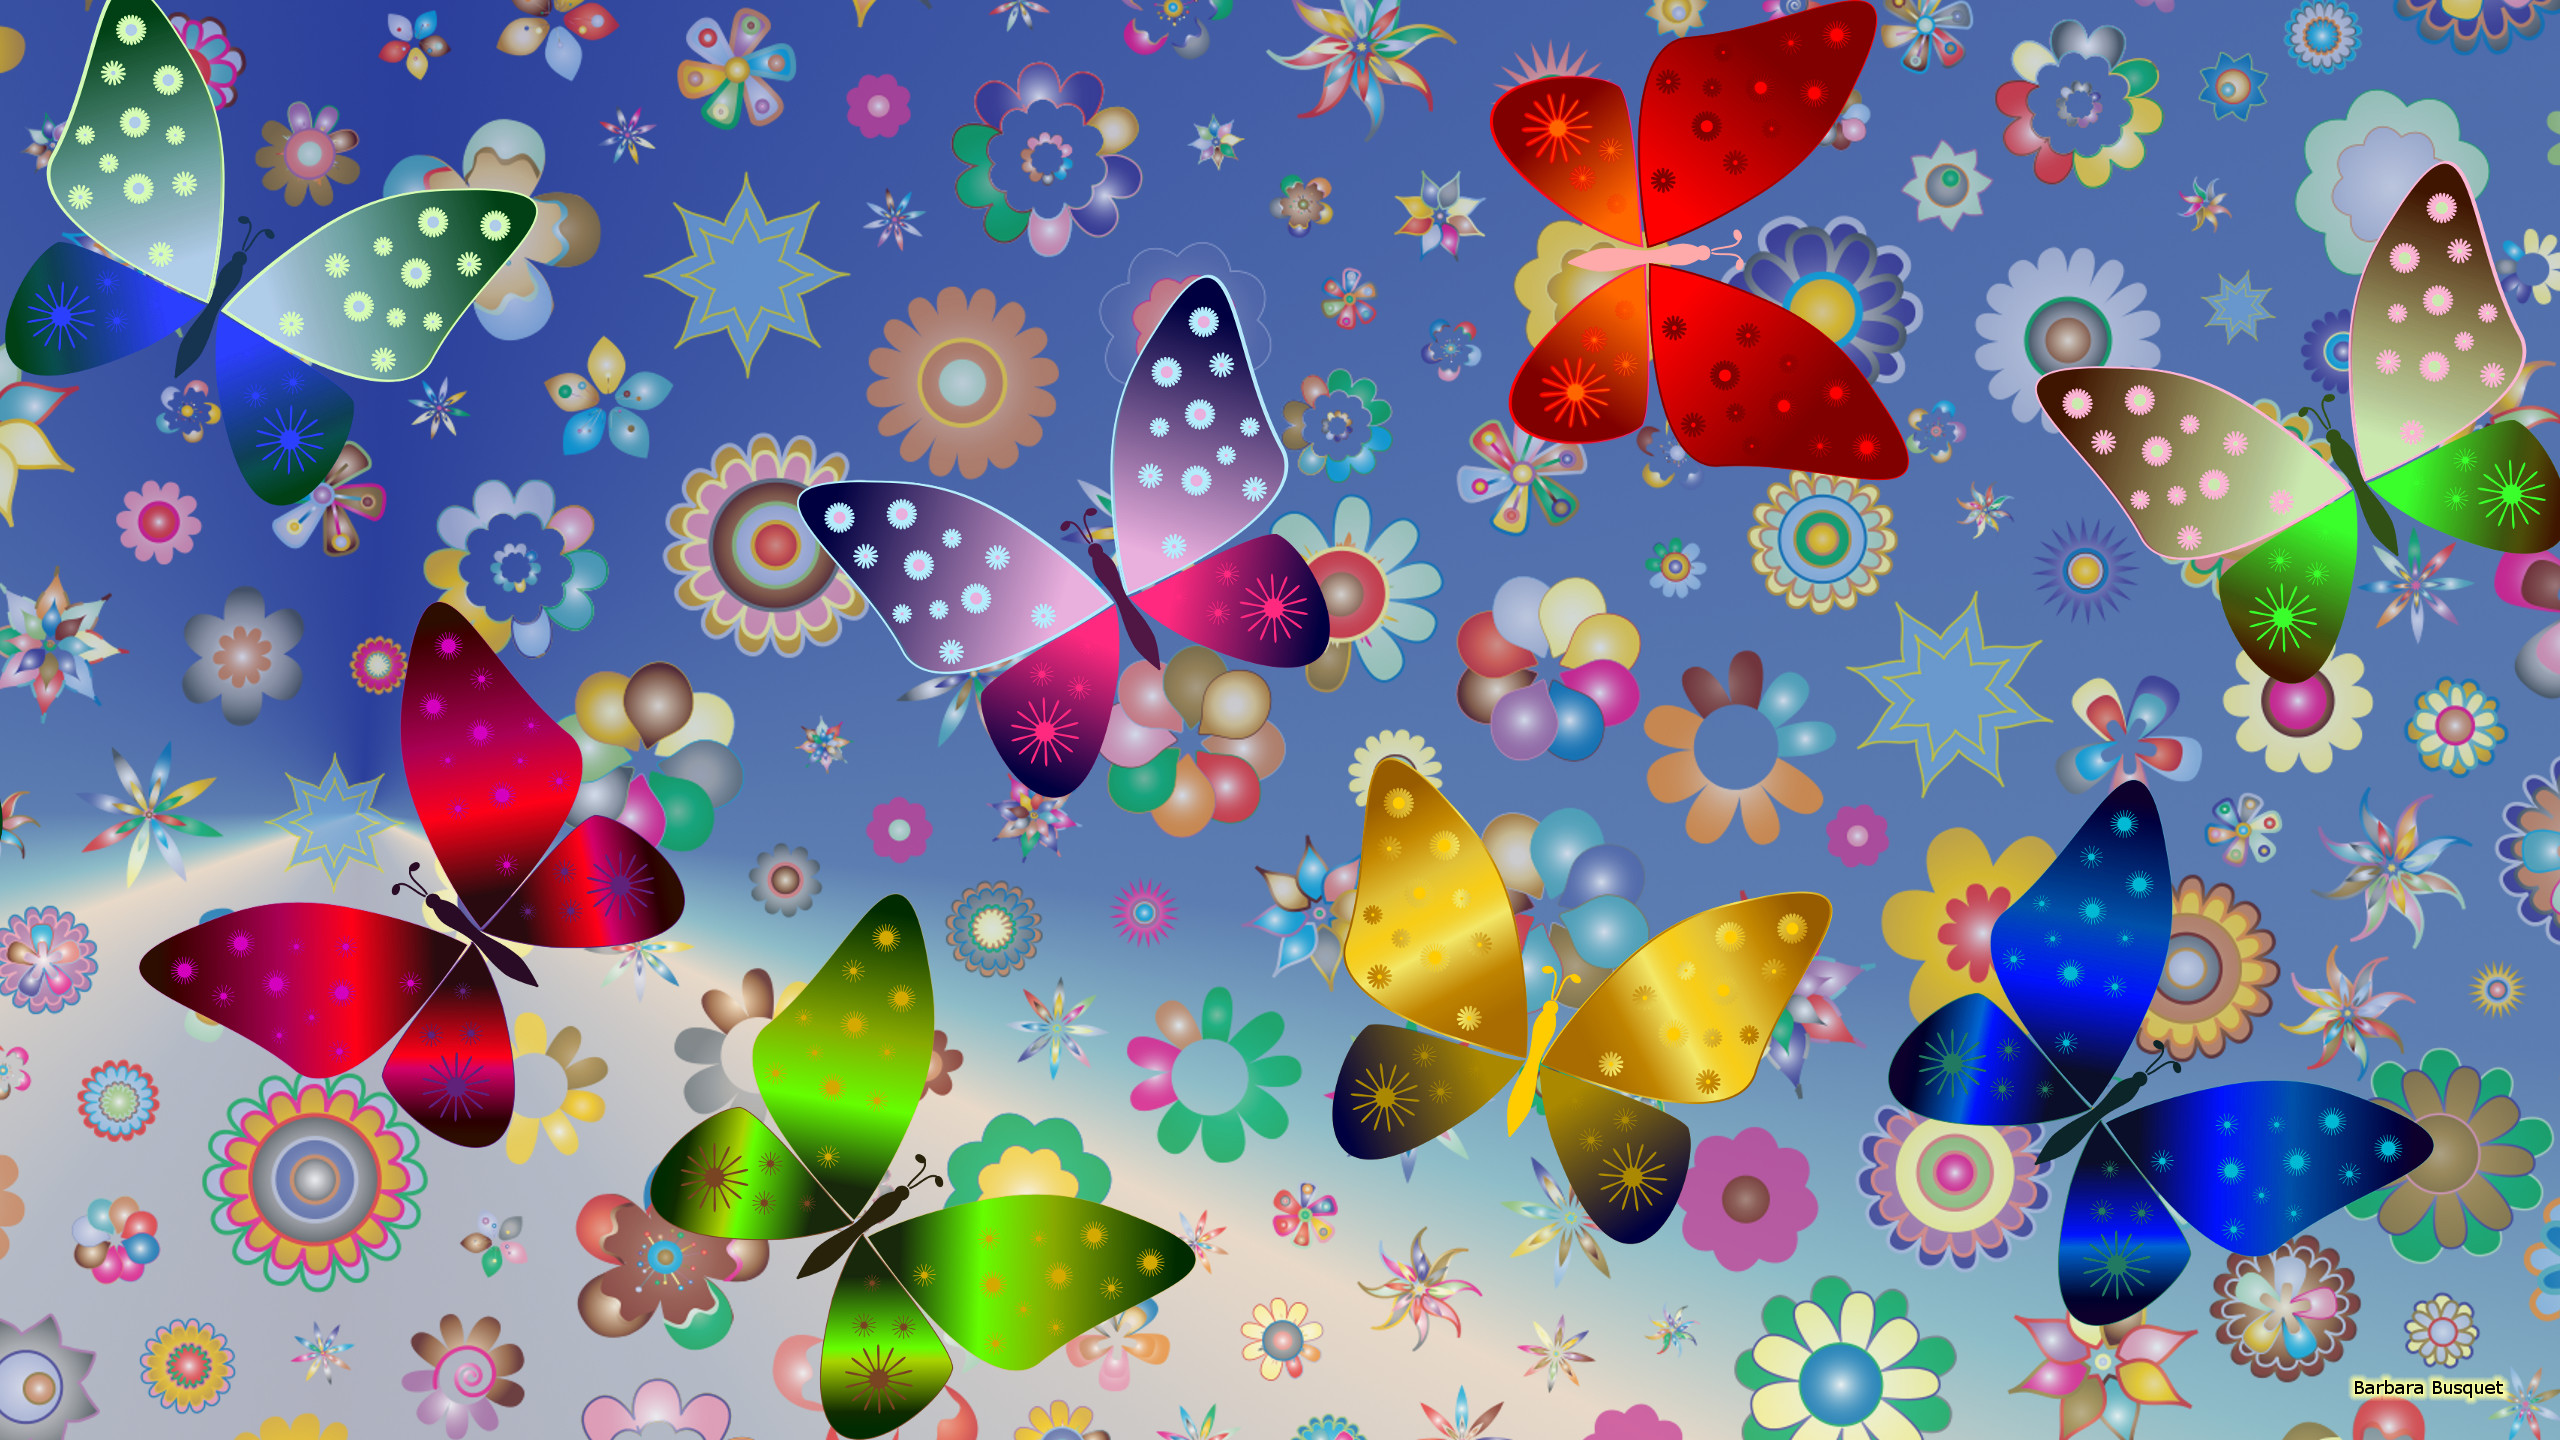 Butterfly Pattern Wallpapers - Wallpaper Cave